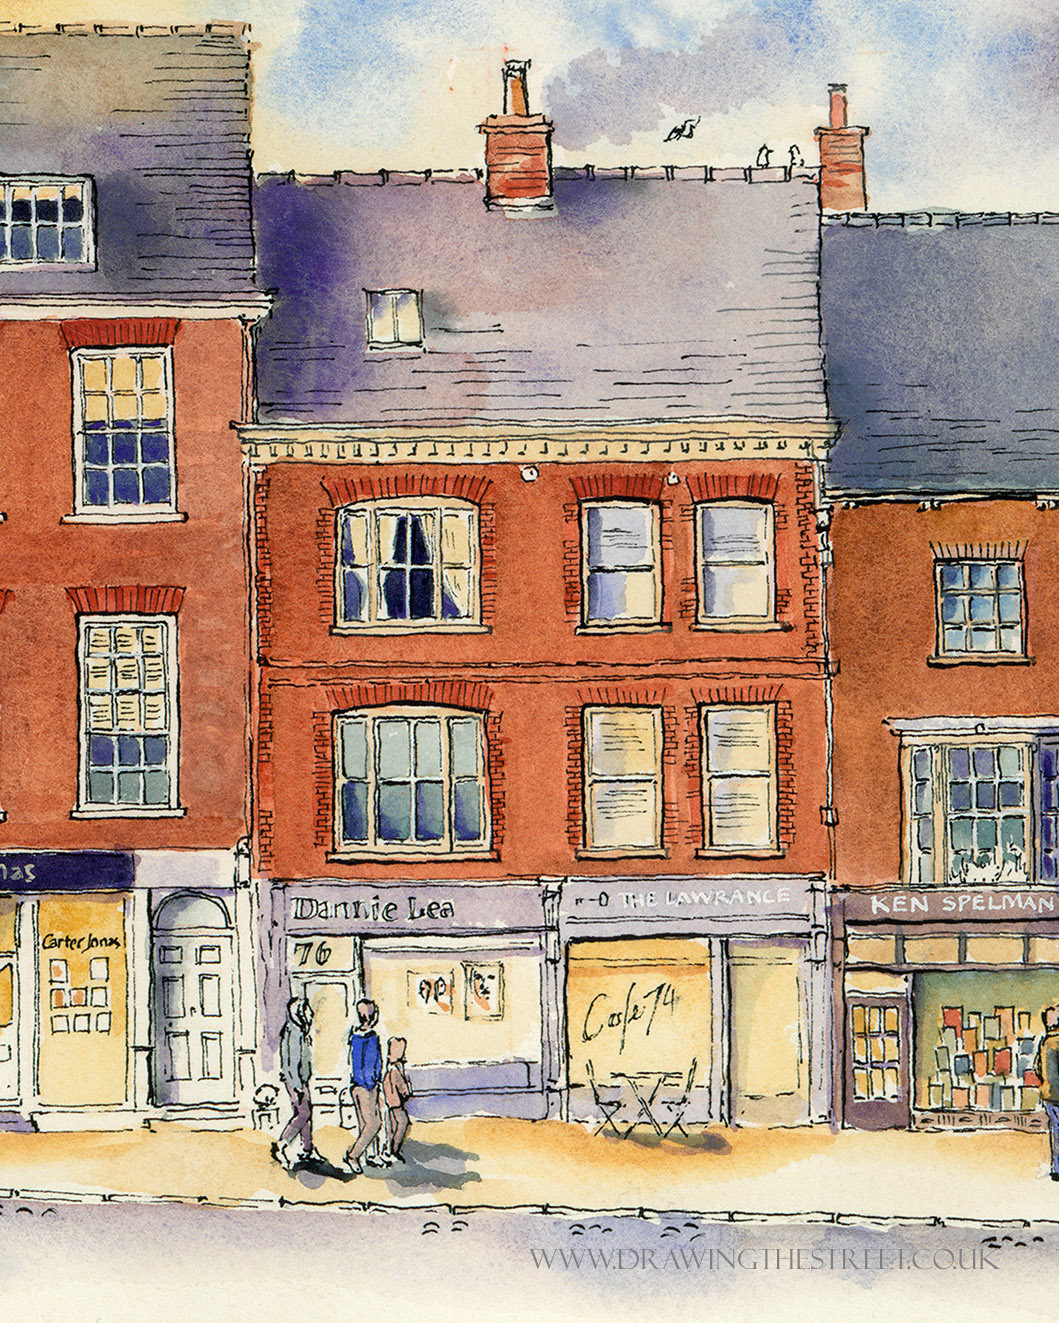 drawing by Ronnie Cruwys of Dannie Lea and The Lawrance, Micklegate York